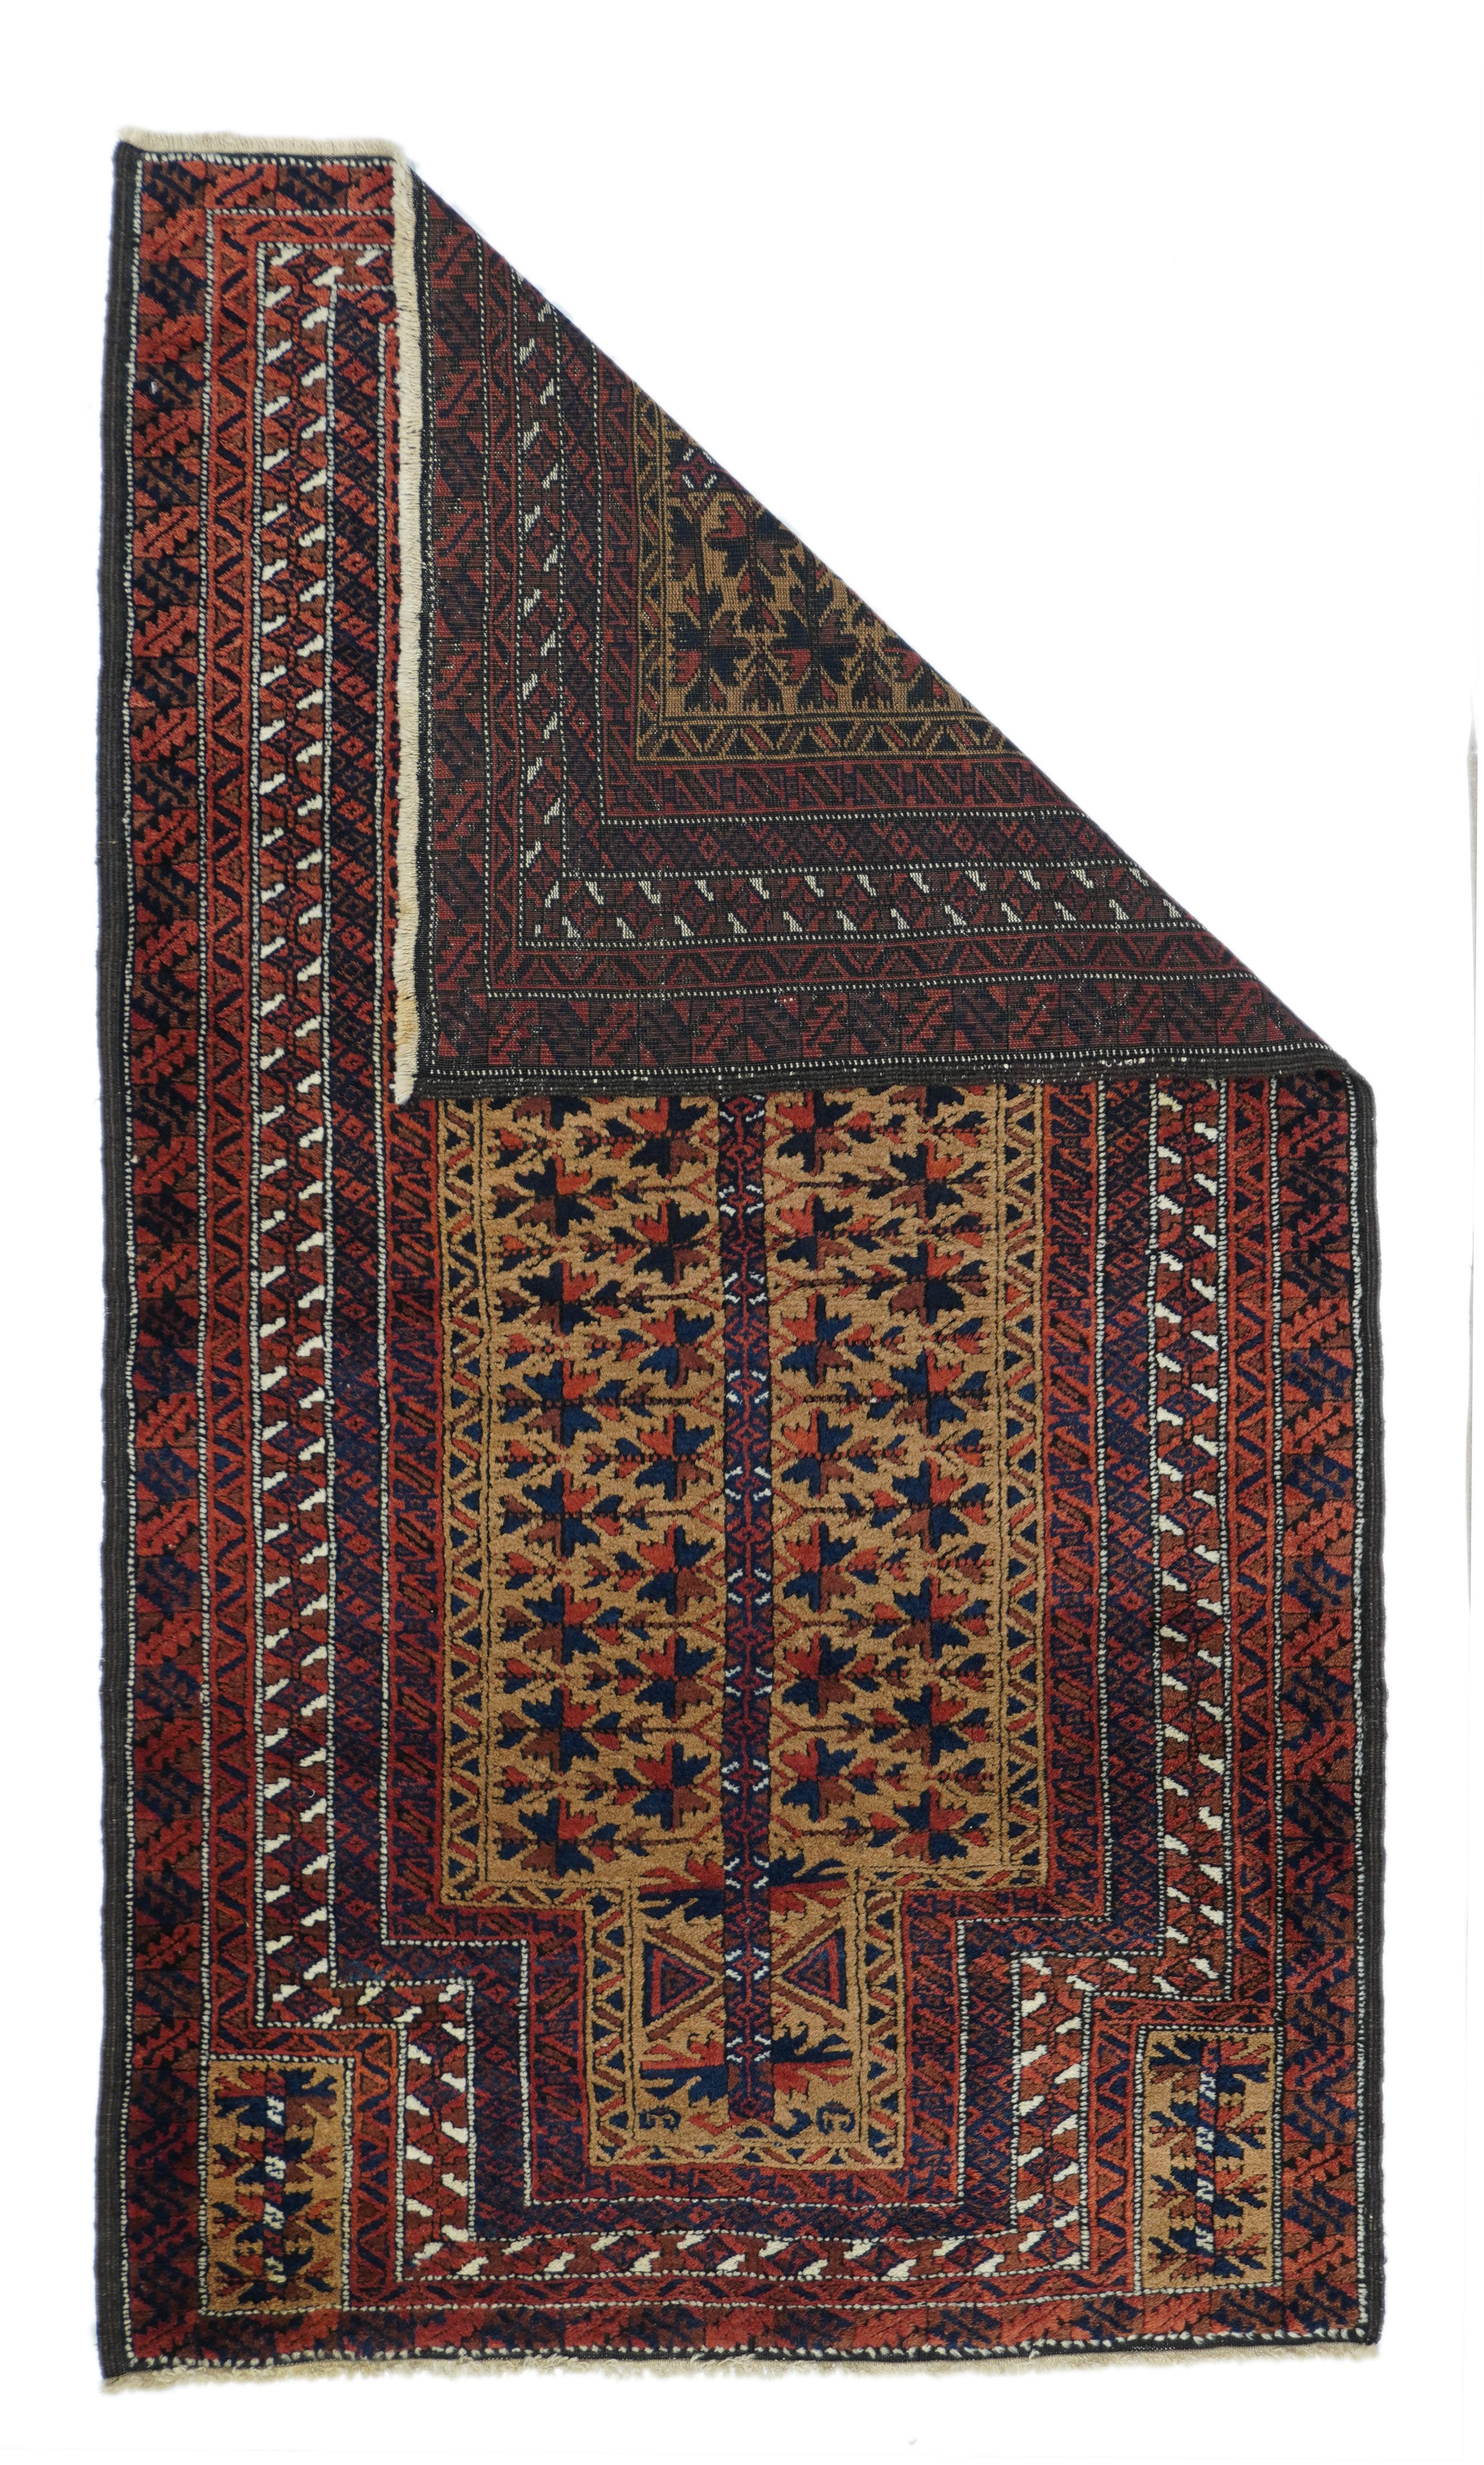 This iconic tribal, all wool piece shows a genuine camel hair, shouldered field with a central “tree of life” with fan flowers at the ends of the branches. Similar flowers in the camel hand panels. Conforming tegbent border and as main surround of